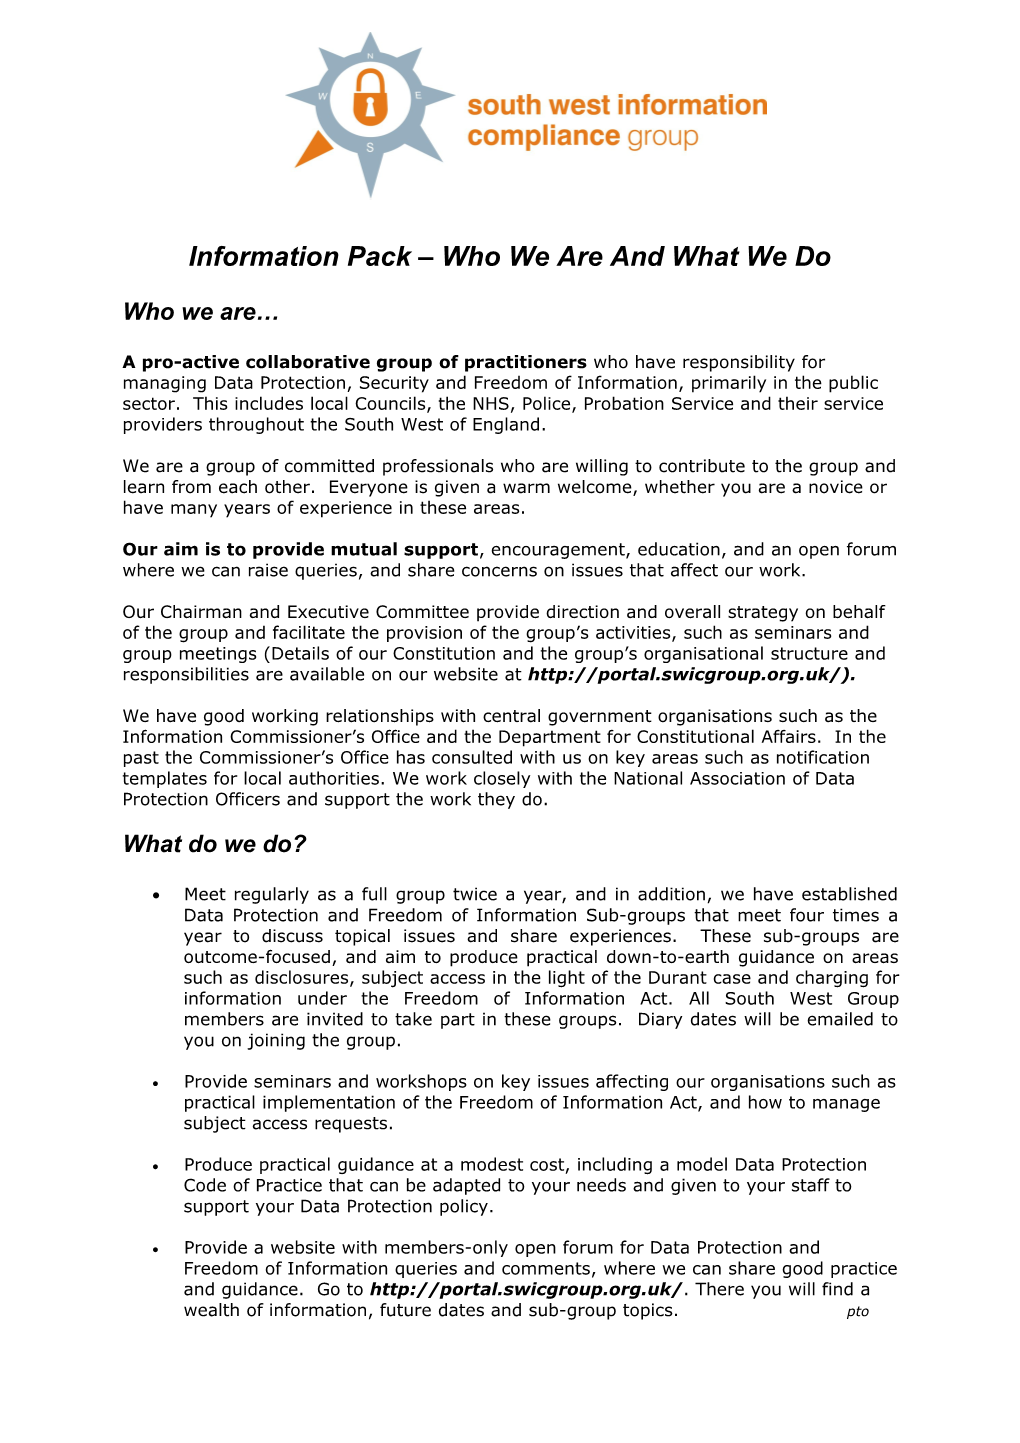 Information Pack Who We Are and What We Do